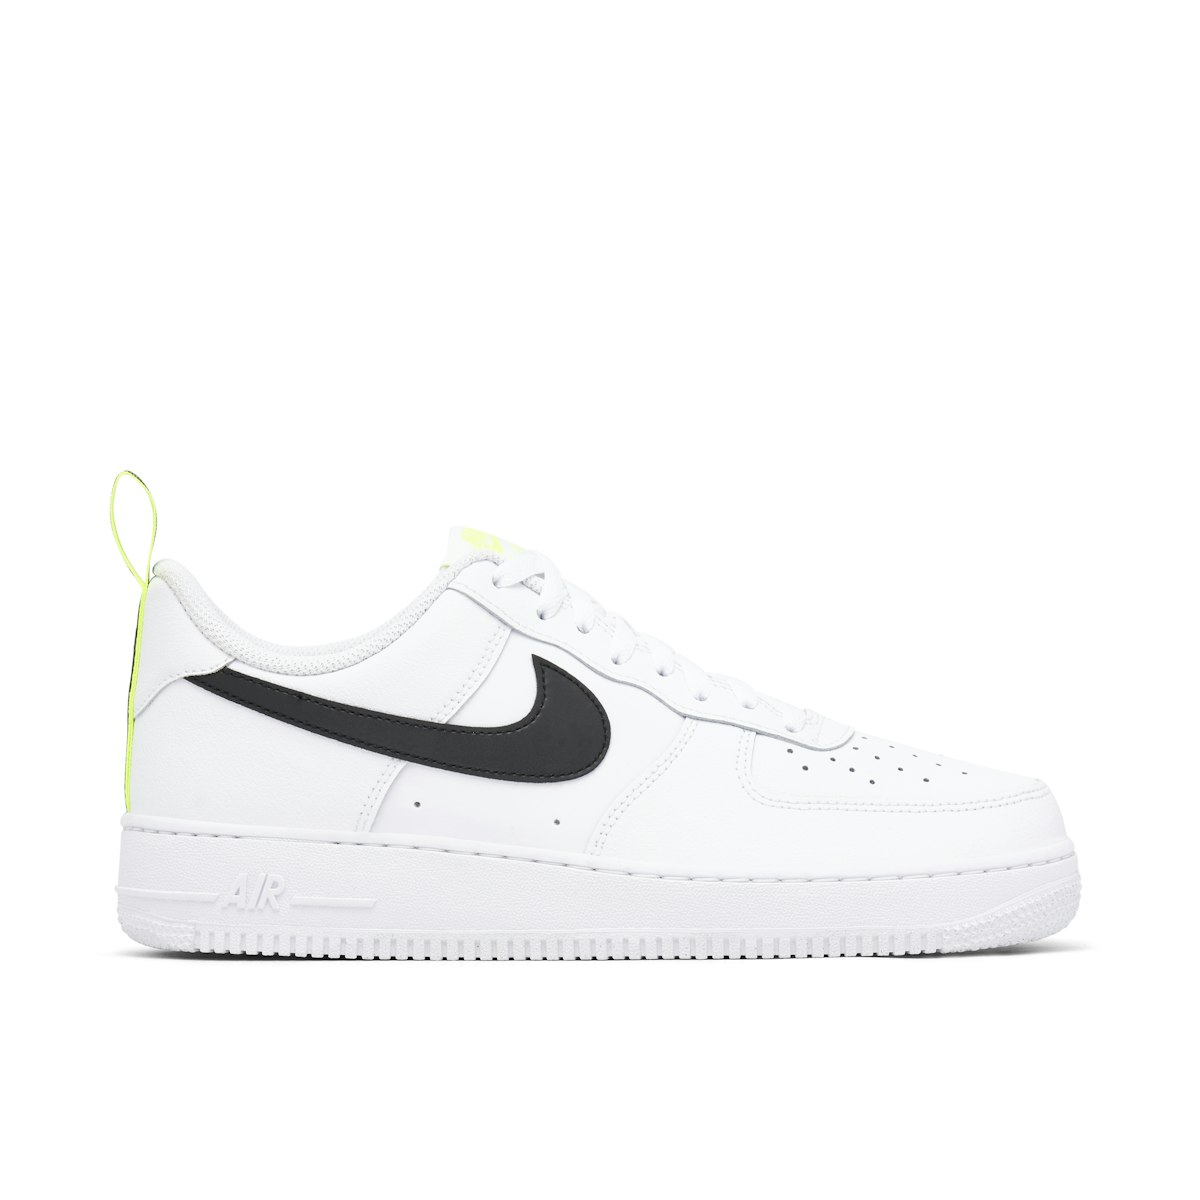 GeekSneaker] Nk Air Force 1 Low '07 LV8 40th Anniversary White Black  Sneakers In White